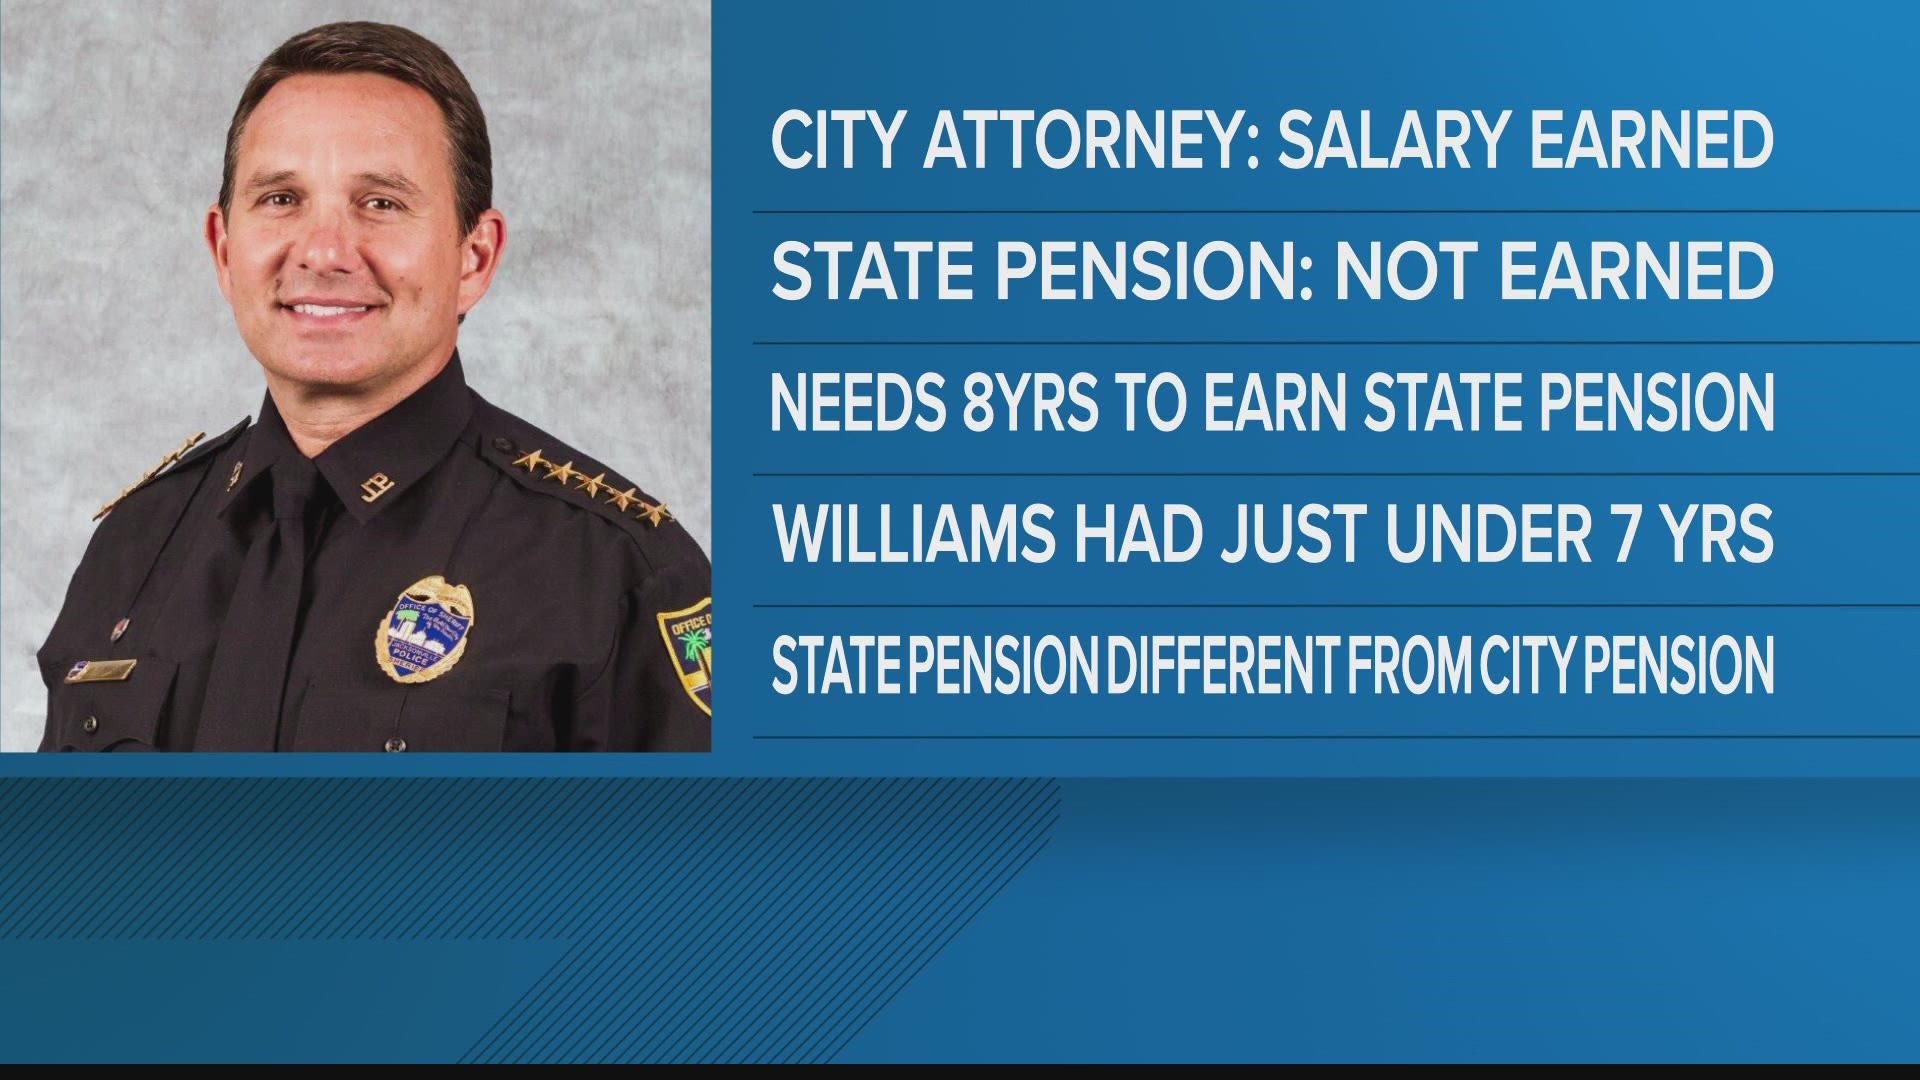 The Florida pension system requires eight years of employment. Williams served just under seven.